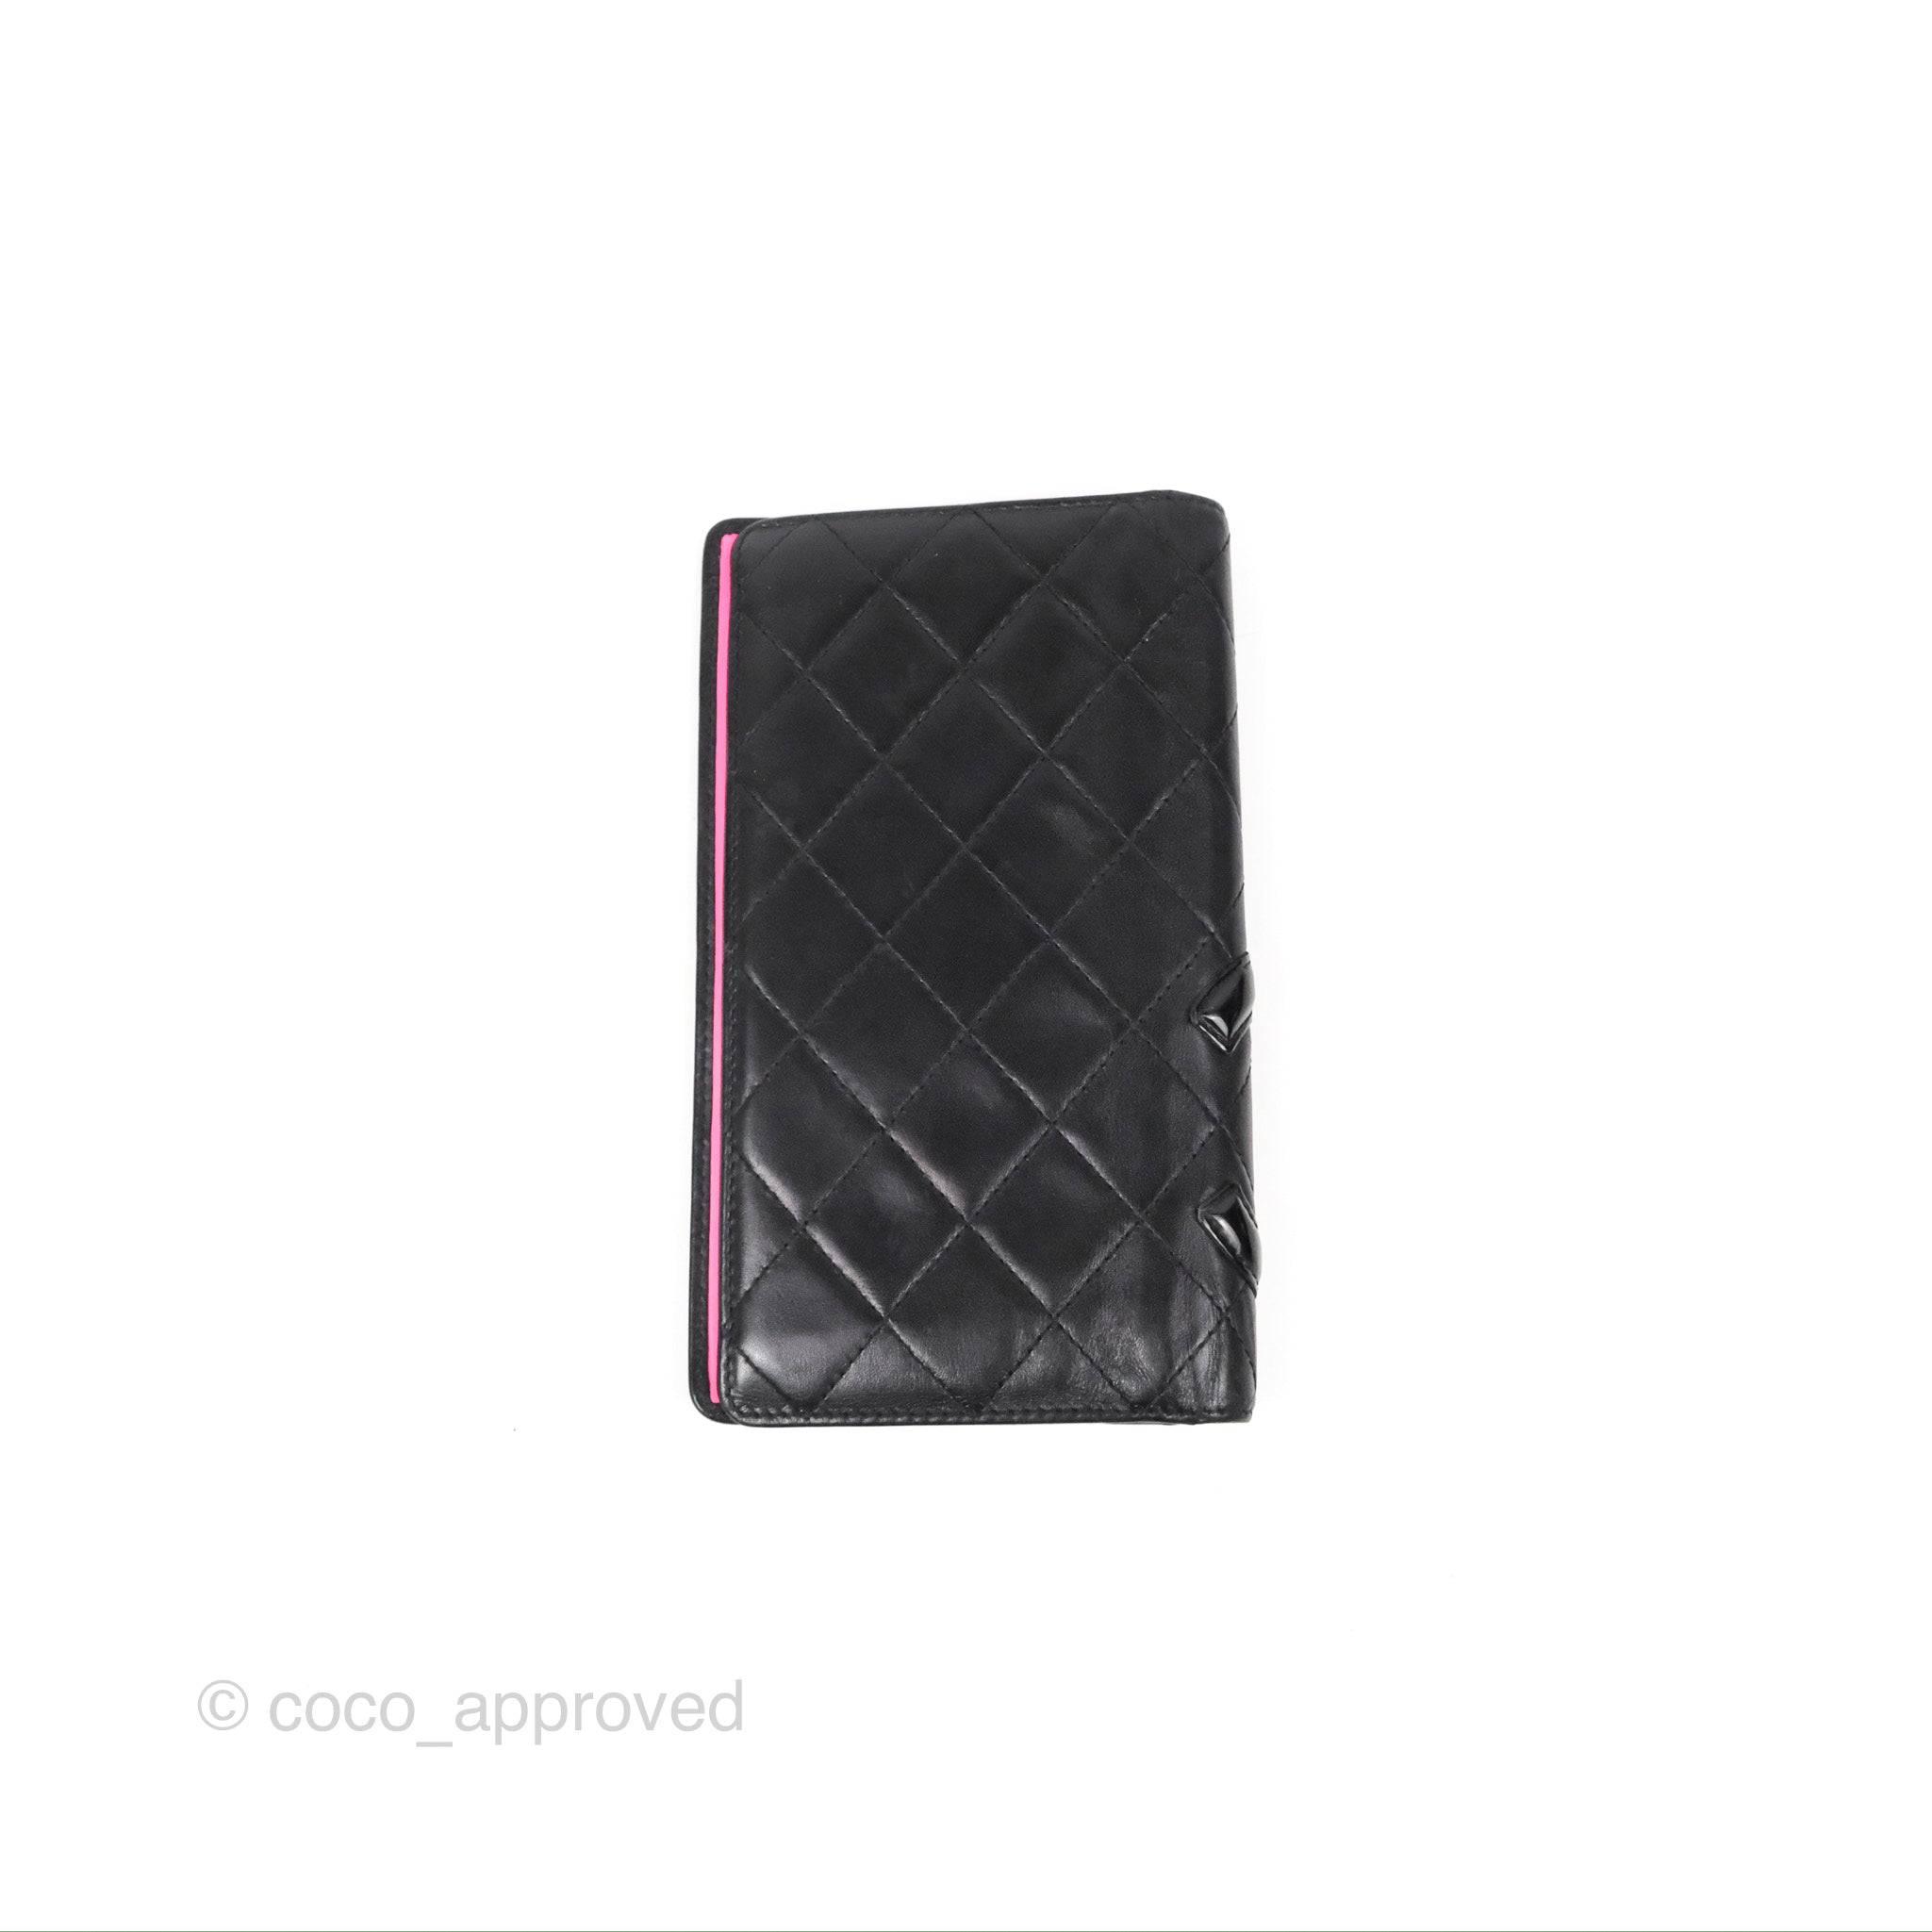 Sold at Auction: Chanel Pink and Black Quilted Leather Cambon